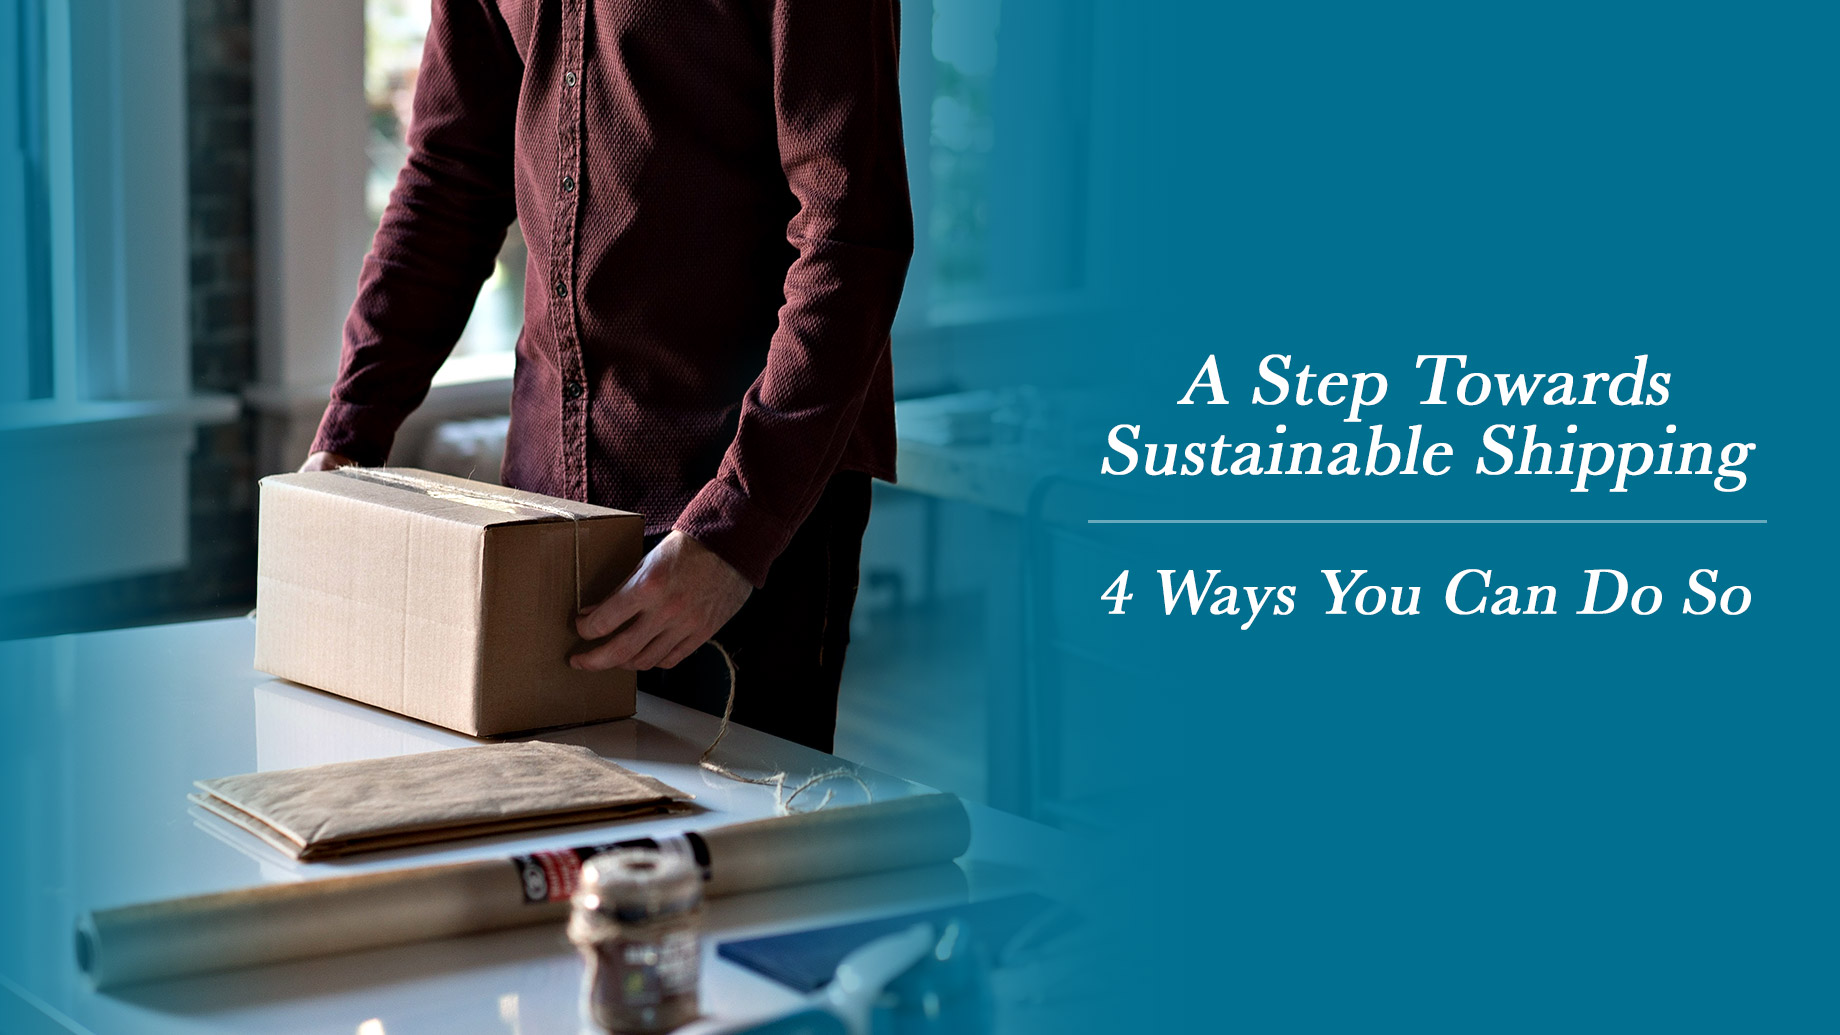 A Step Towards Sustainable Shipping - 4 Ways You Can Do So